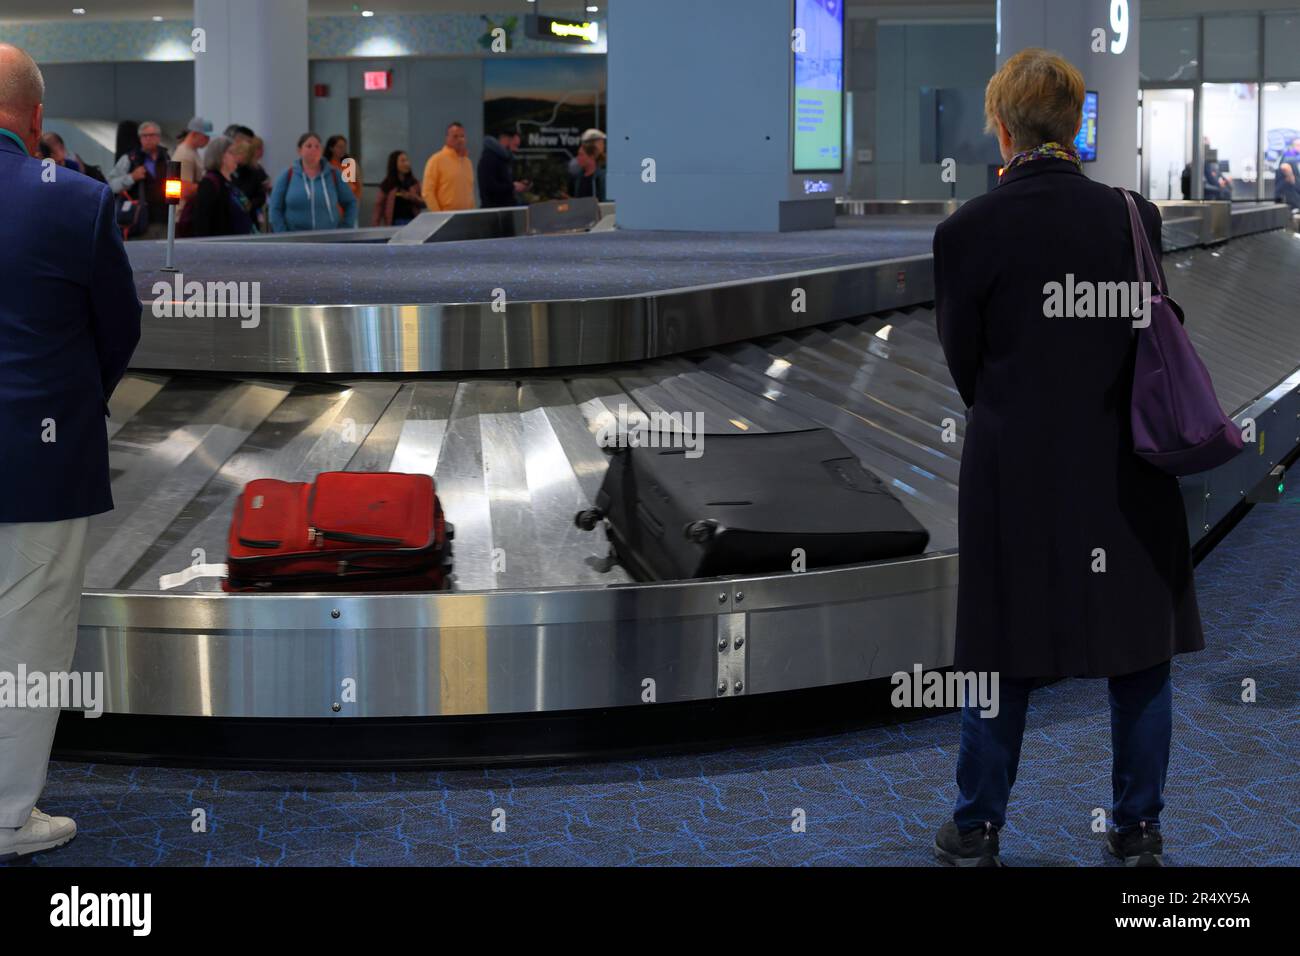 People waiting to pick up luggage from a baggage carousel at LaGuardia Airport Terminal B baggage claim area, New York City. Stock Photo